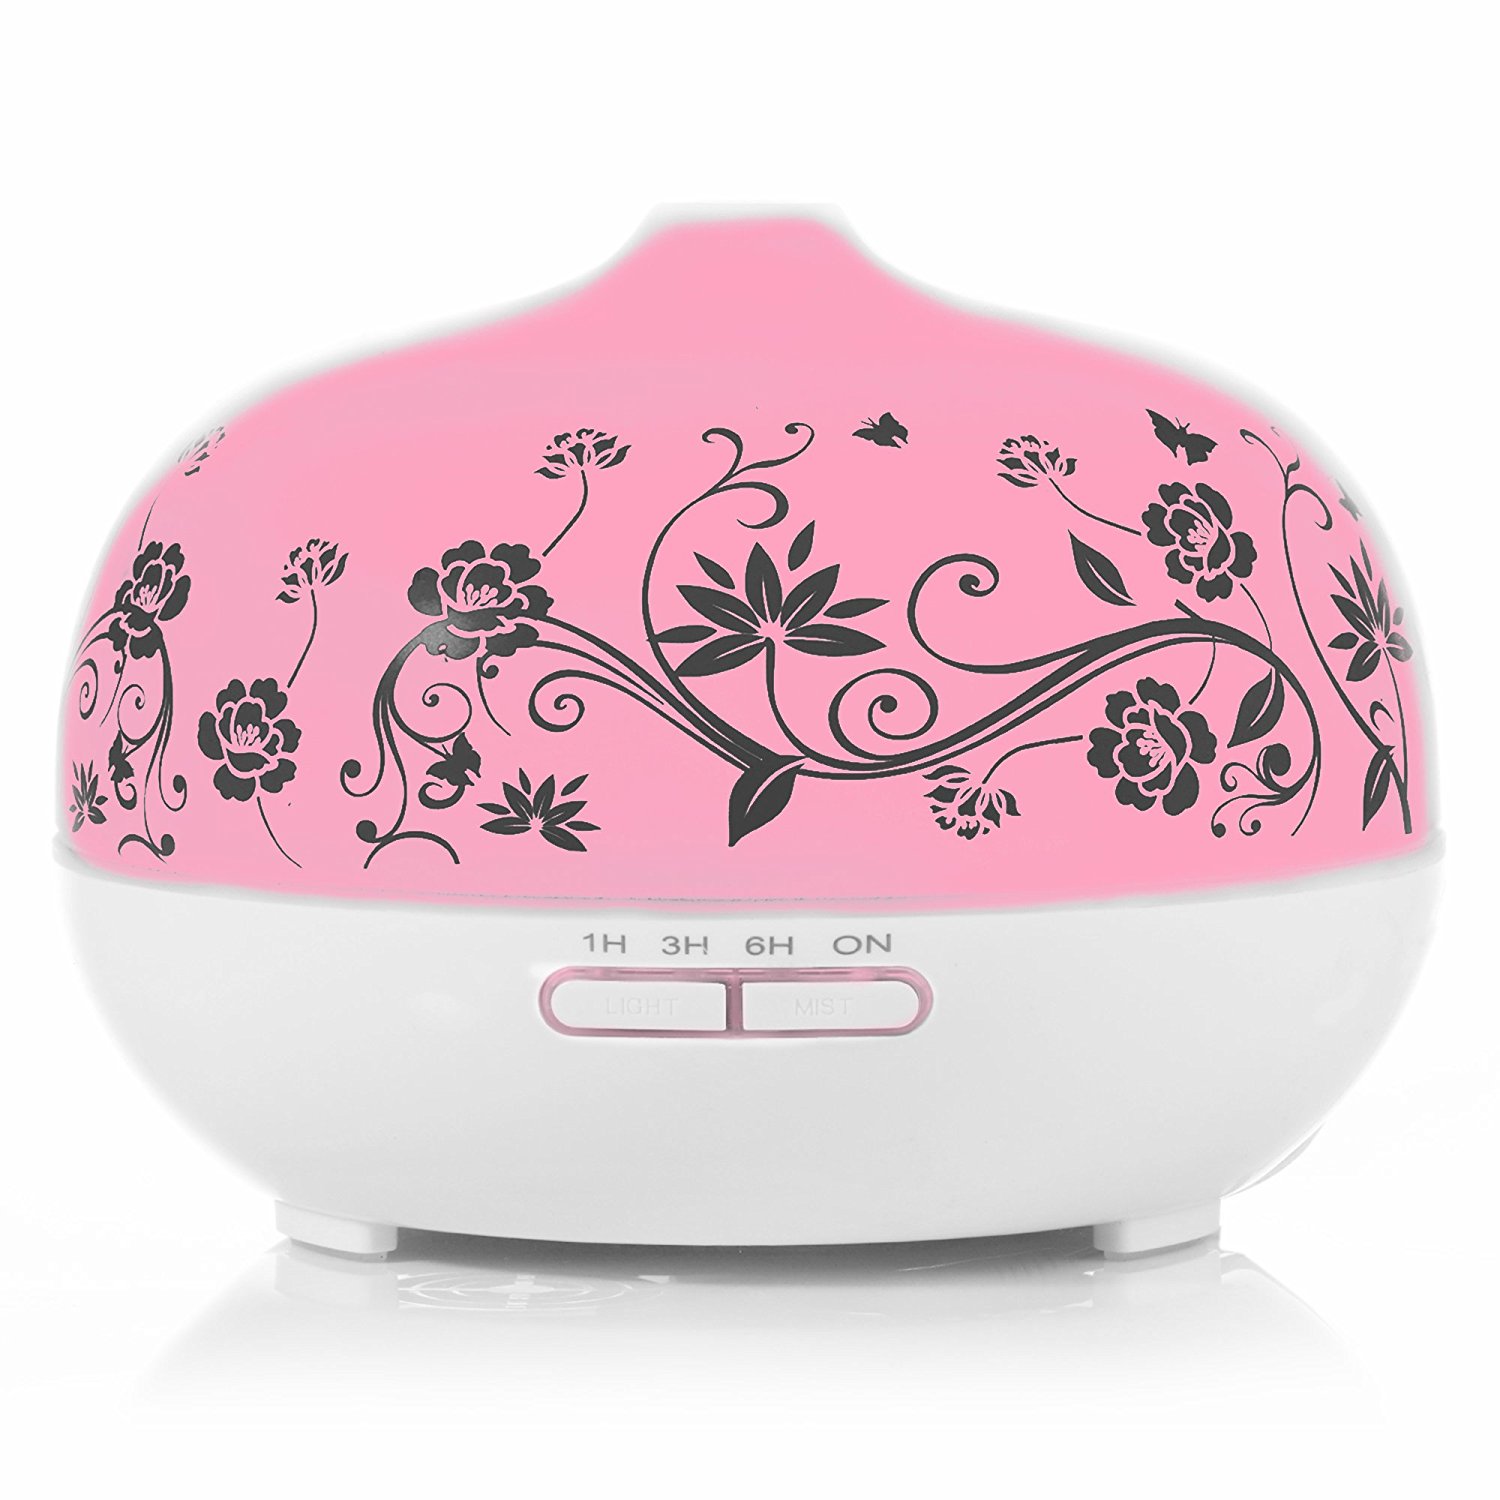 The Latest Discount Information on Aromatherapy Diffusers